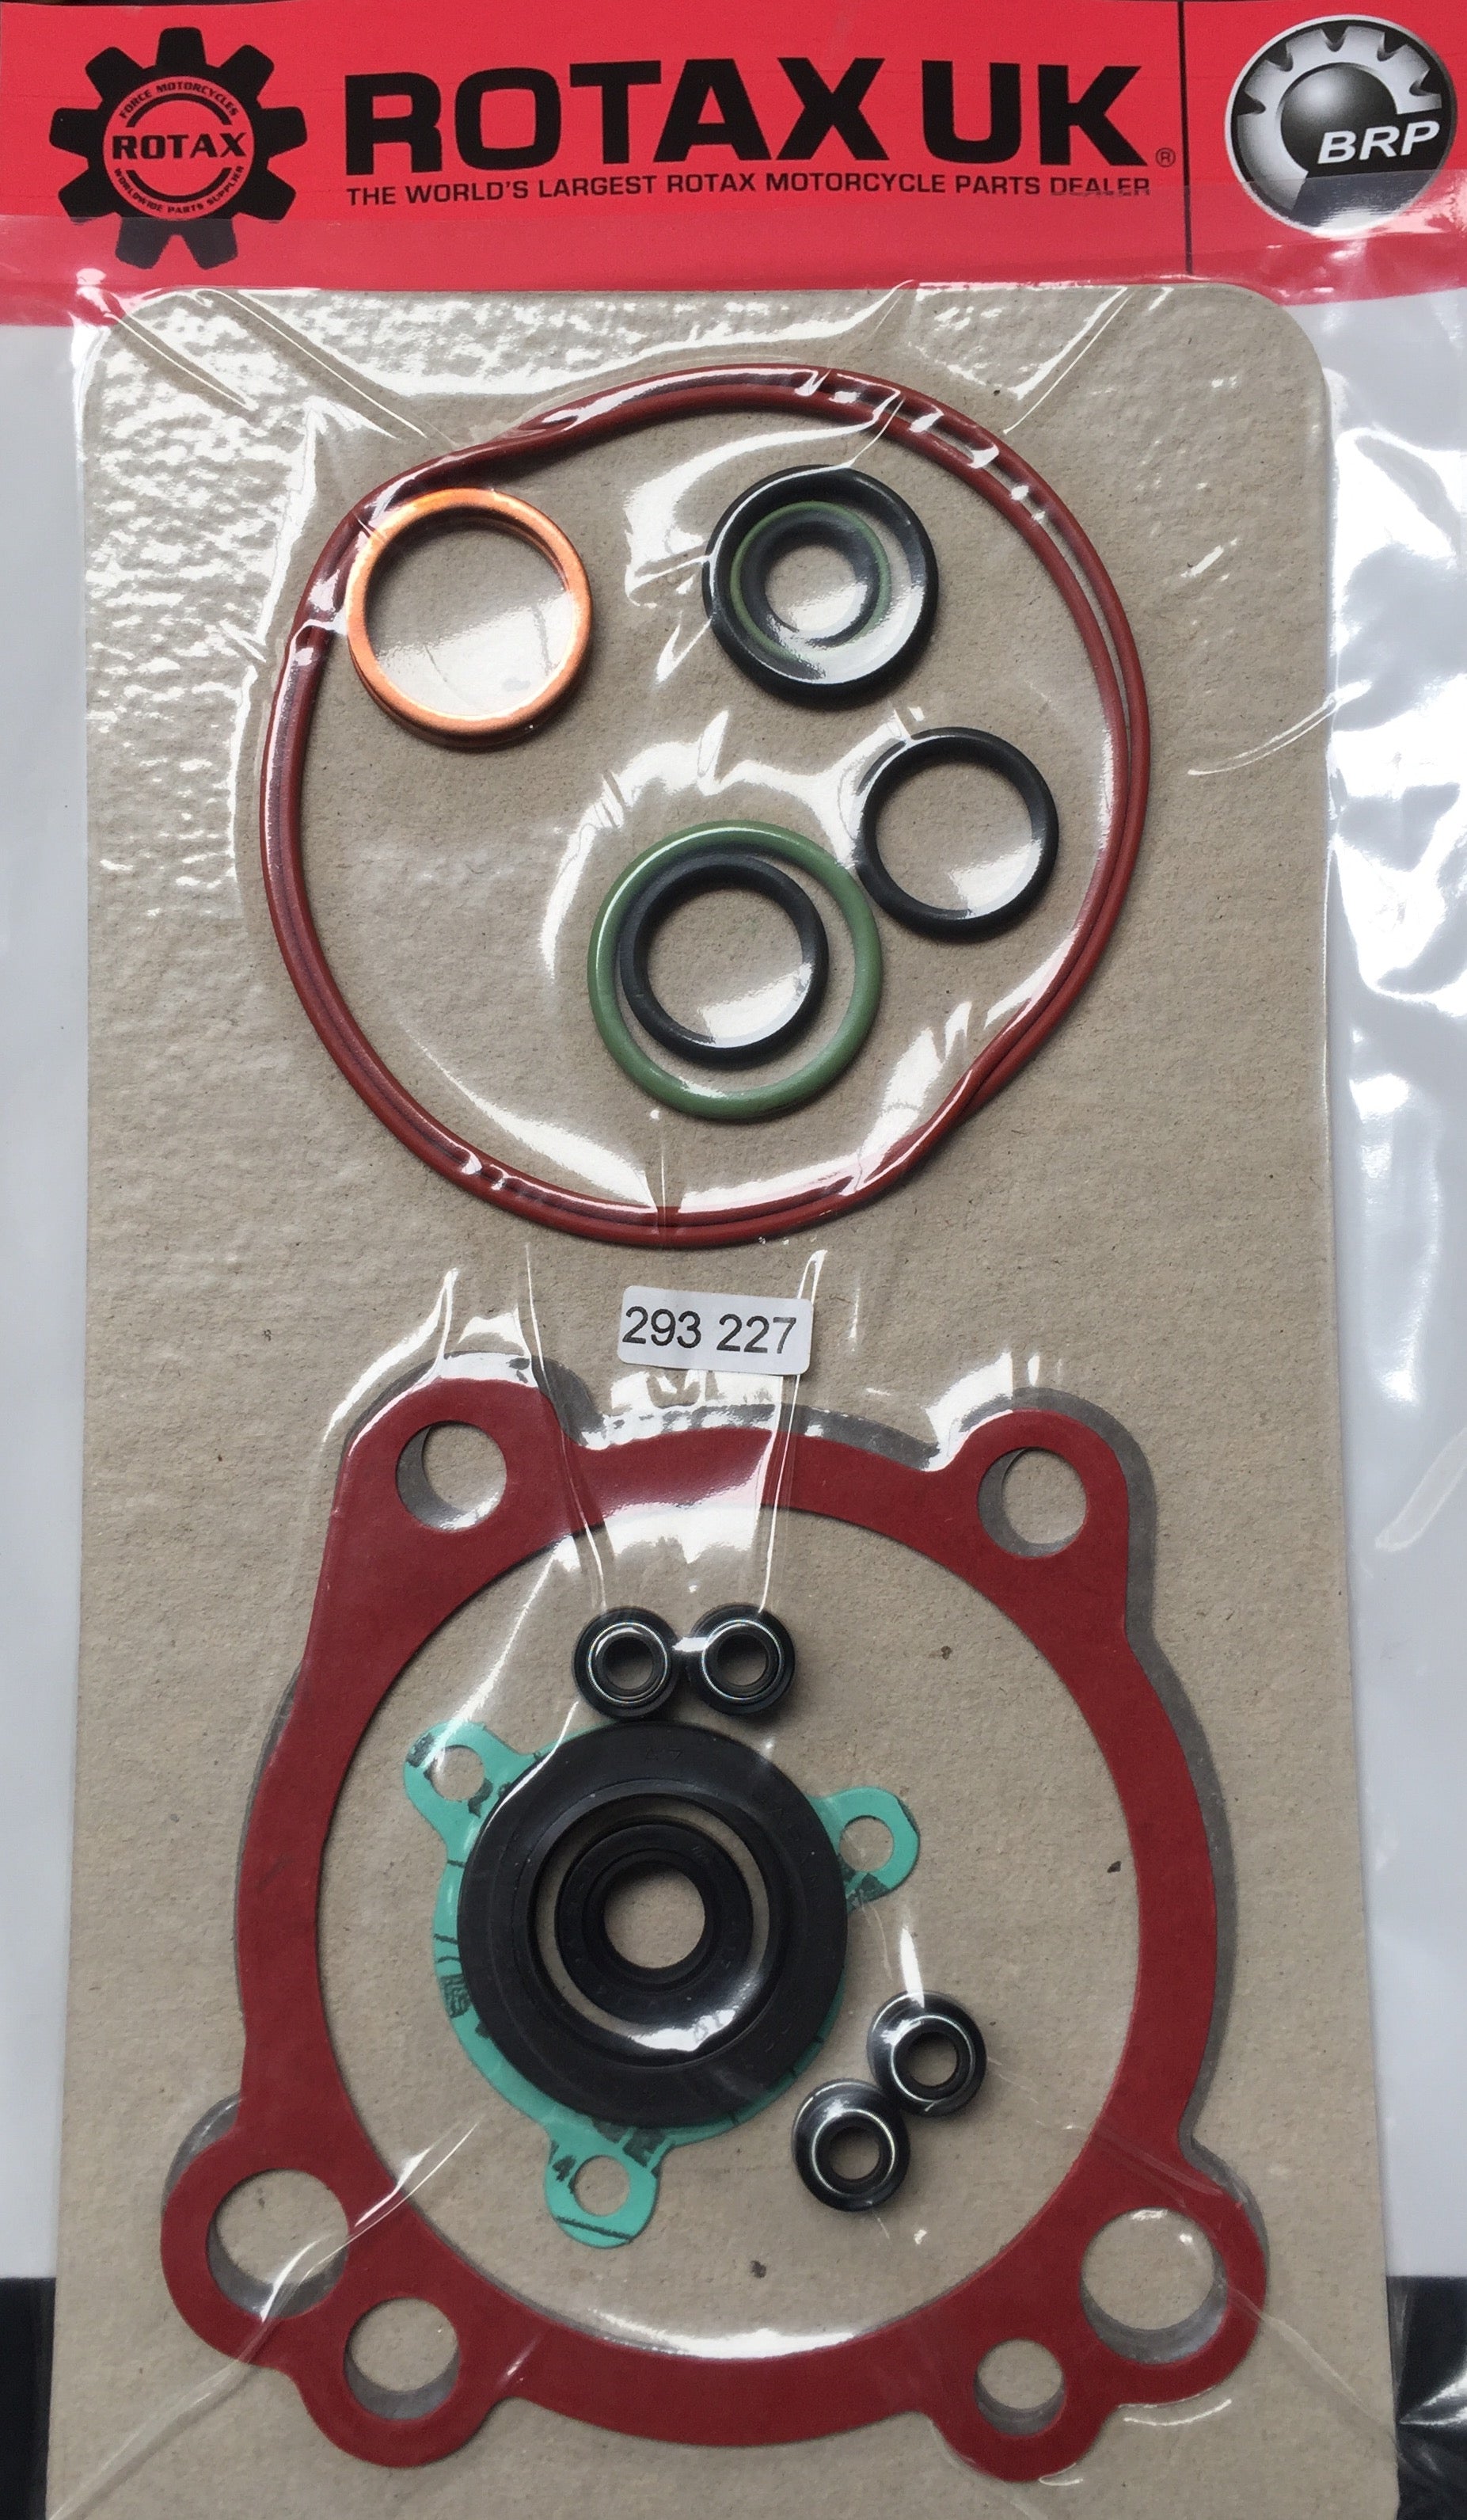 293227 - Gasket Set Top for engine types: 348, 604, 504E rotax